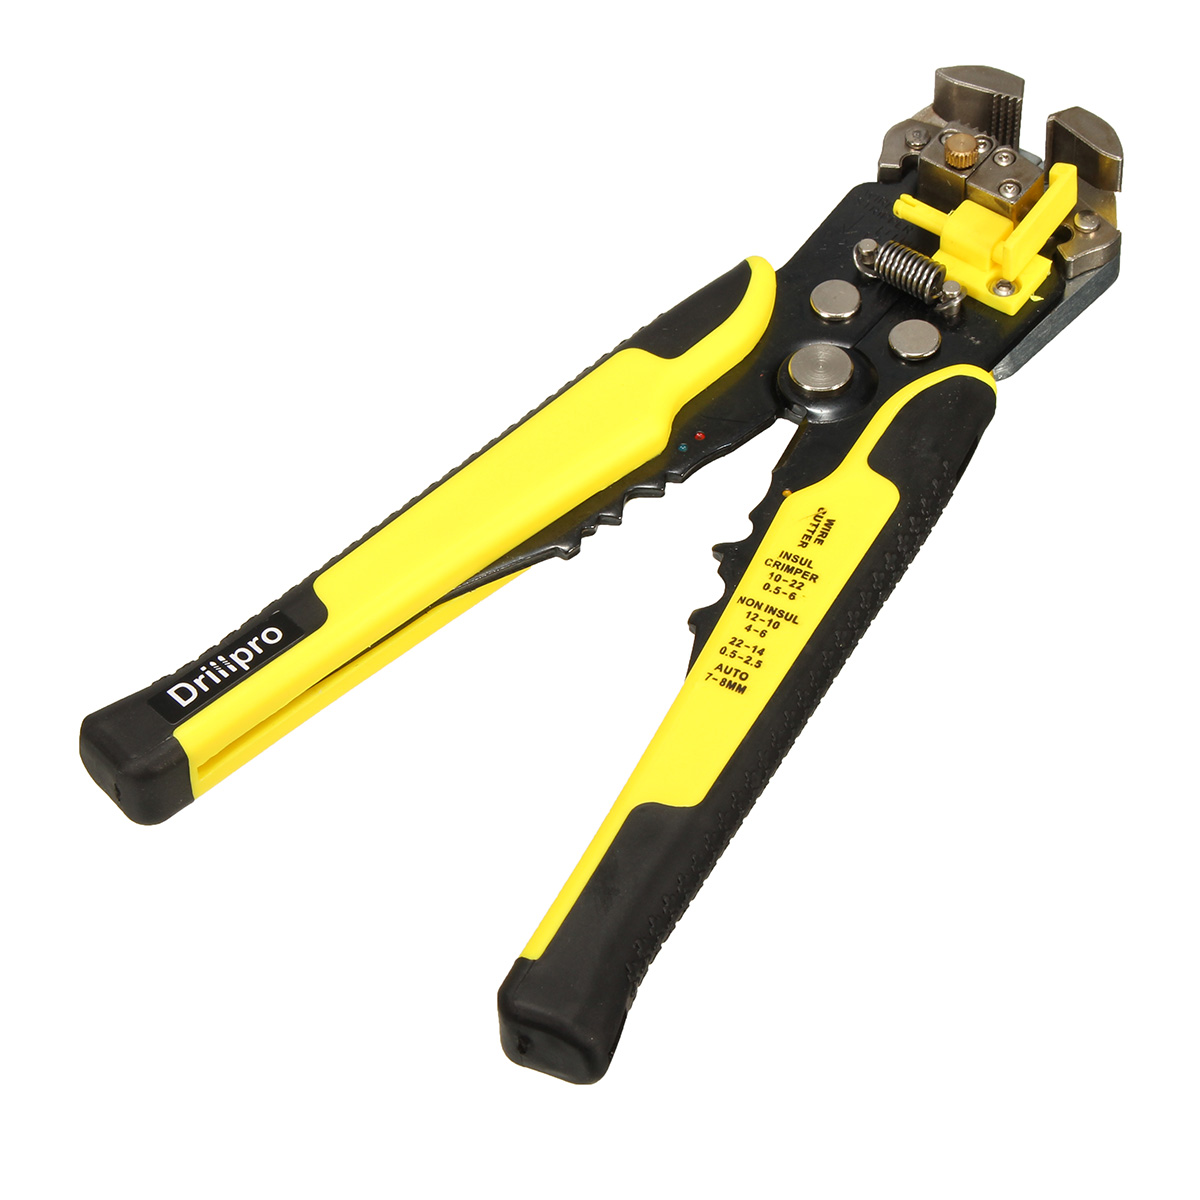 

Drillpro Multifunctional Ratchet Crimping Tool Wire Strippers Terminals Pliers